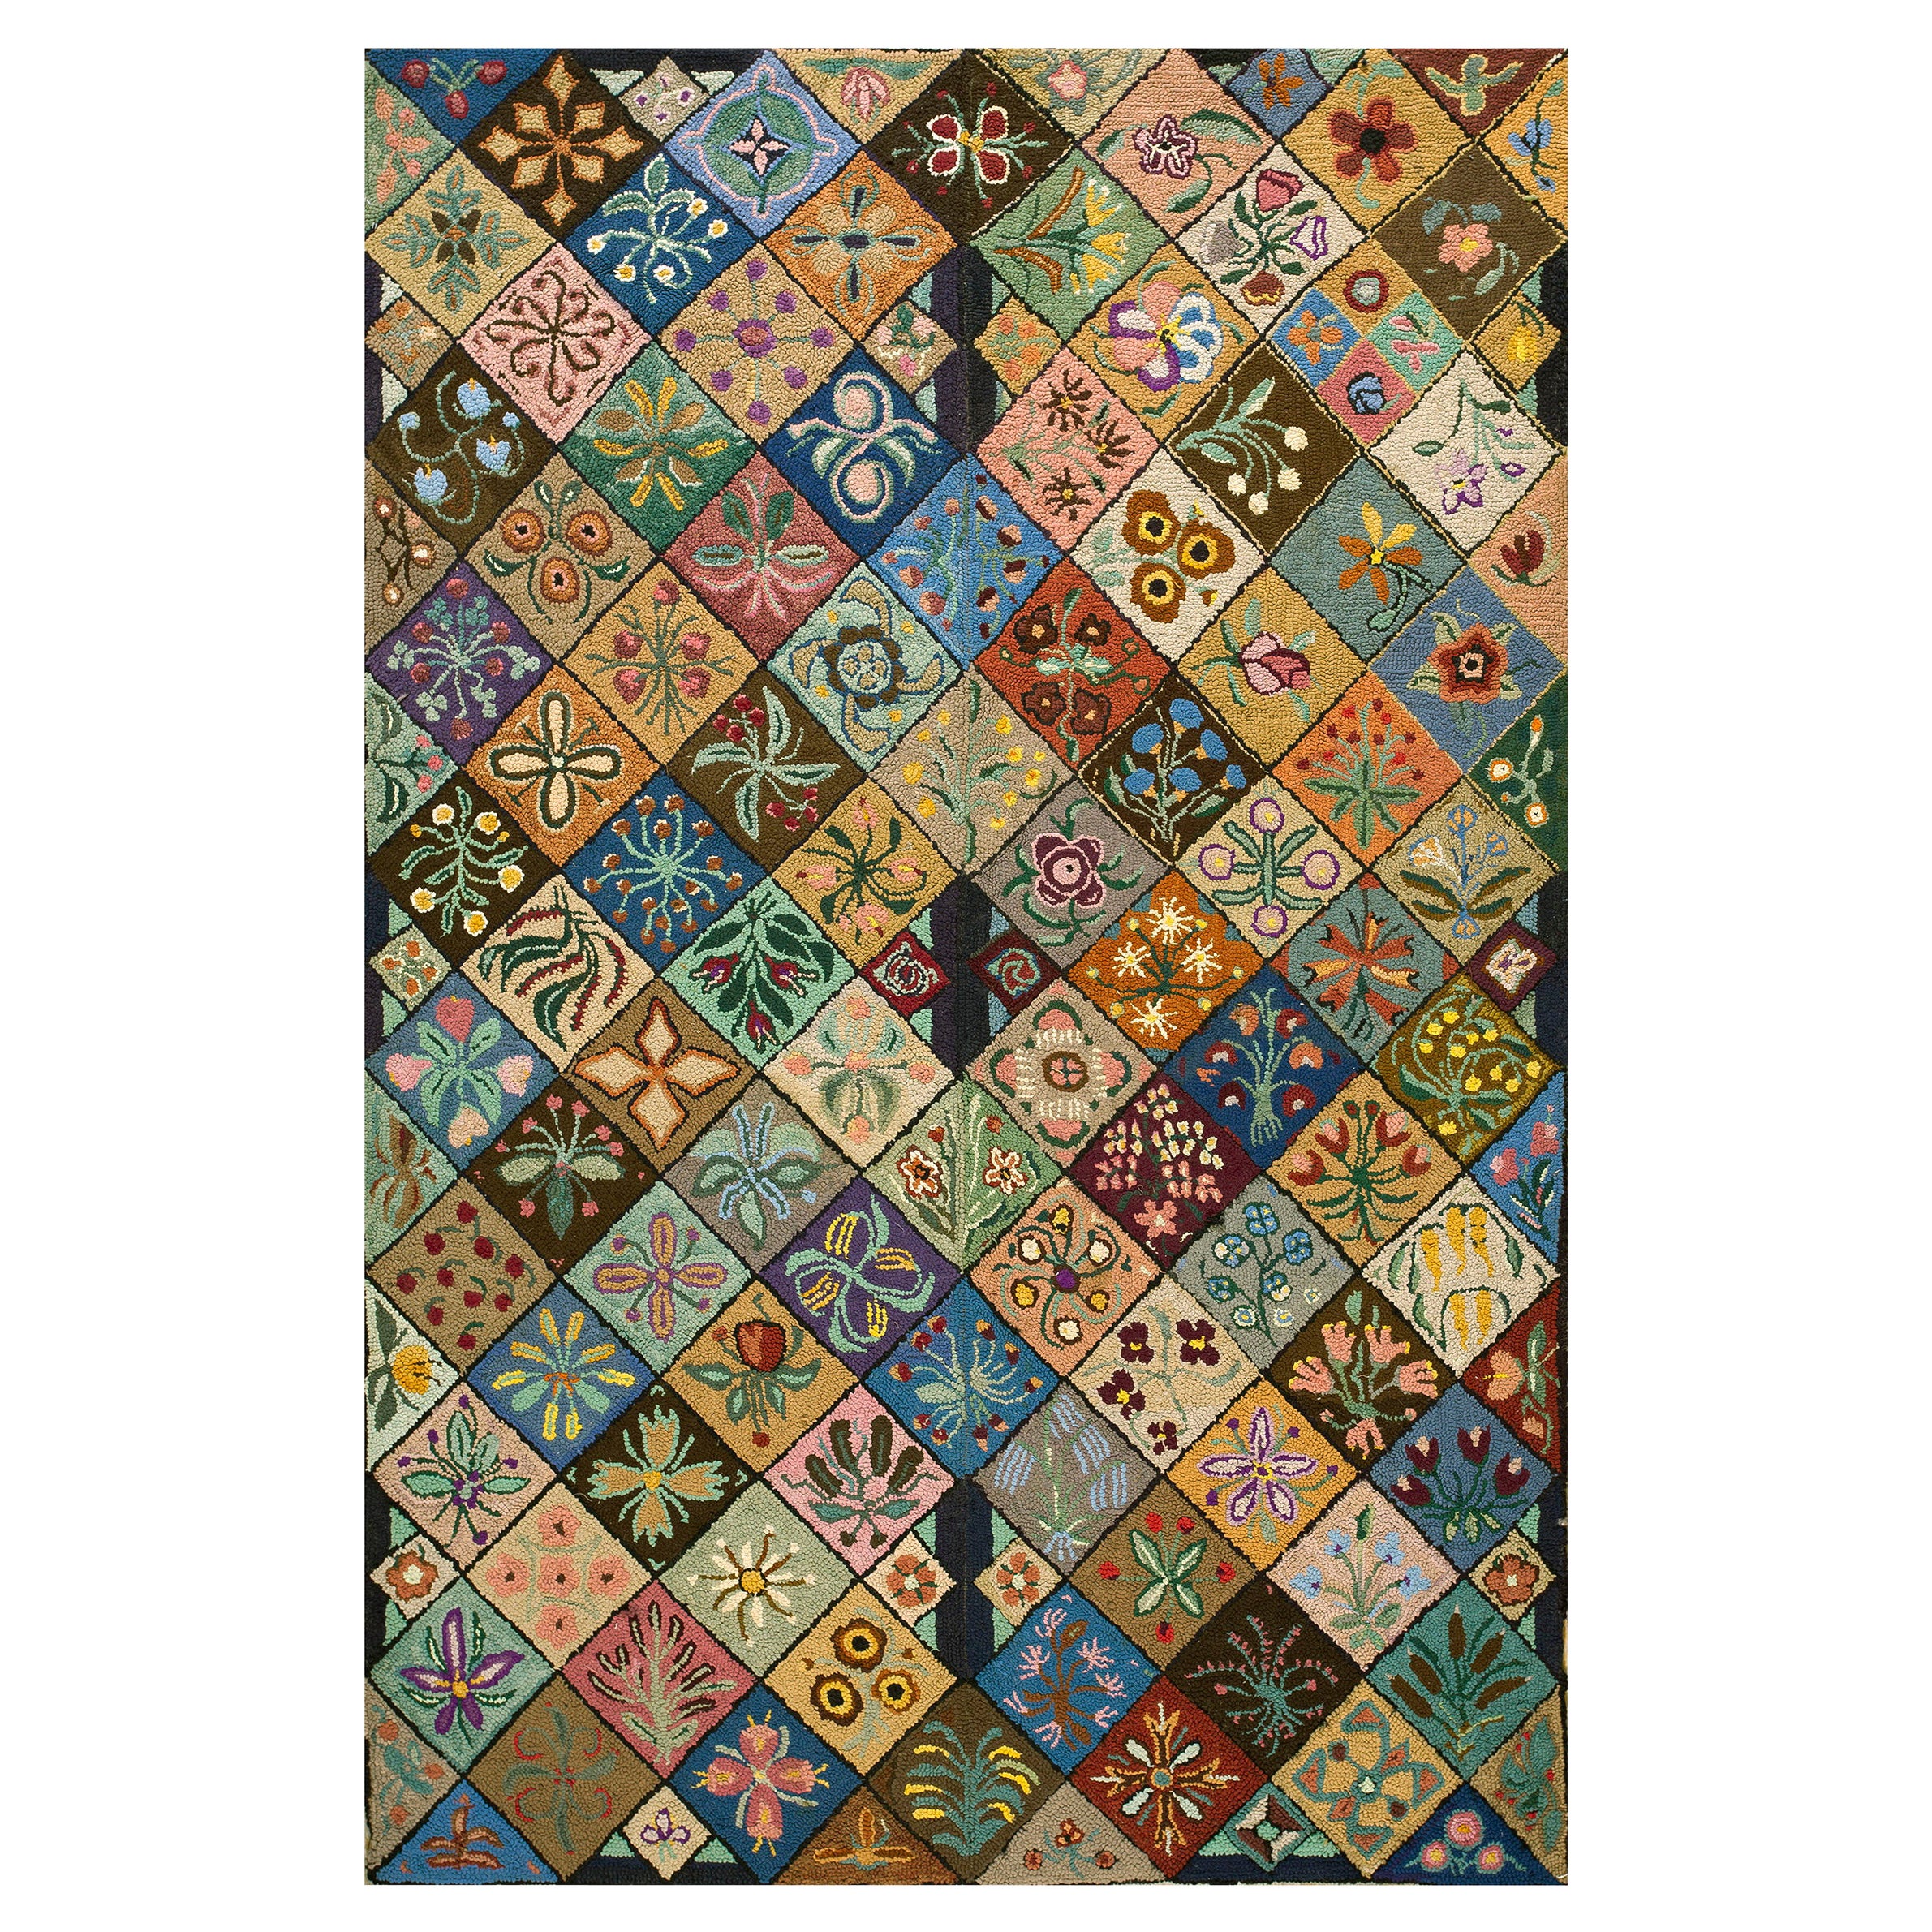 1930s American Hooked Rug ( 6' x 8'9" - 183 x 268 )